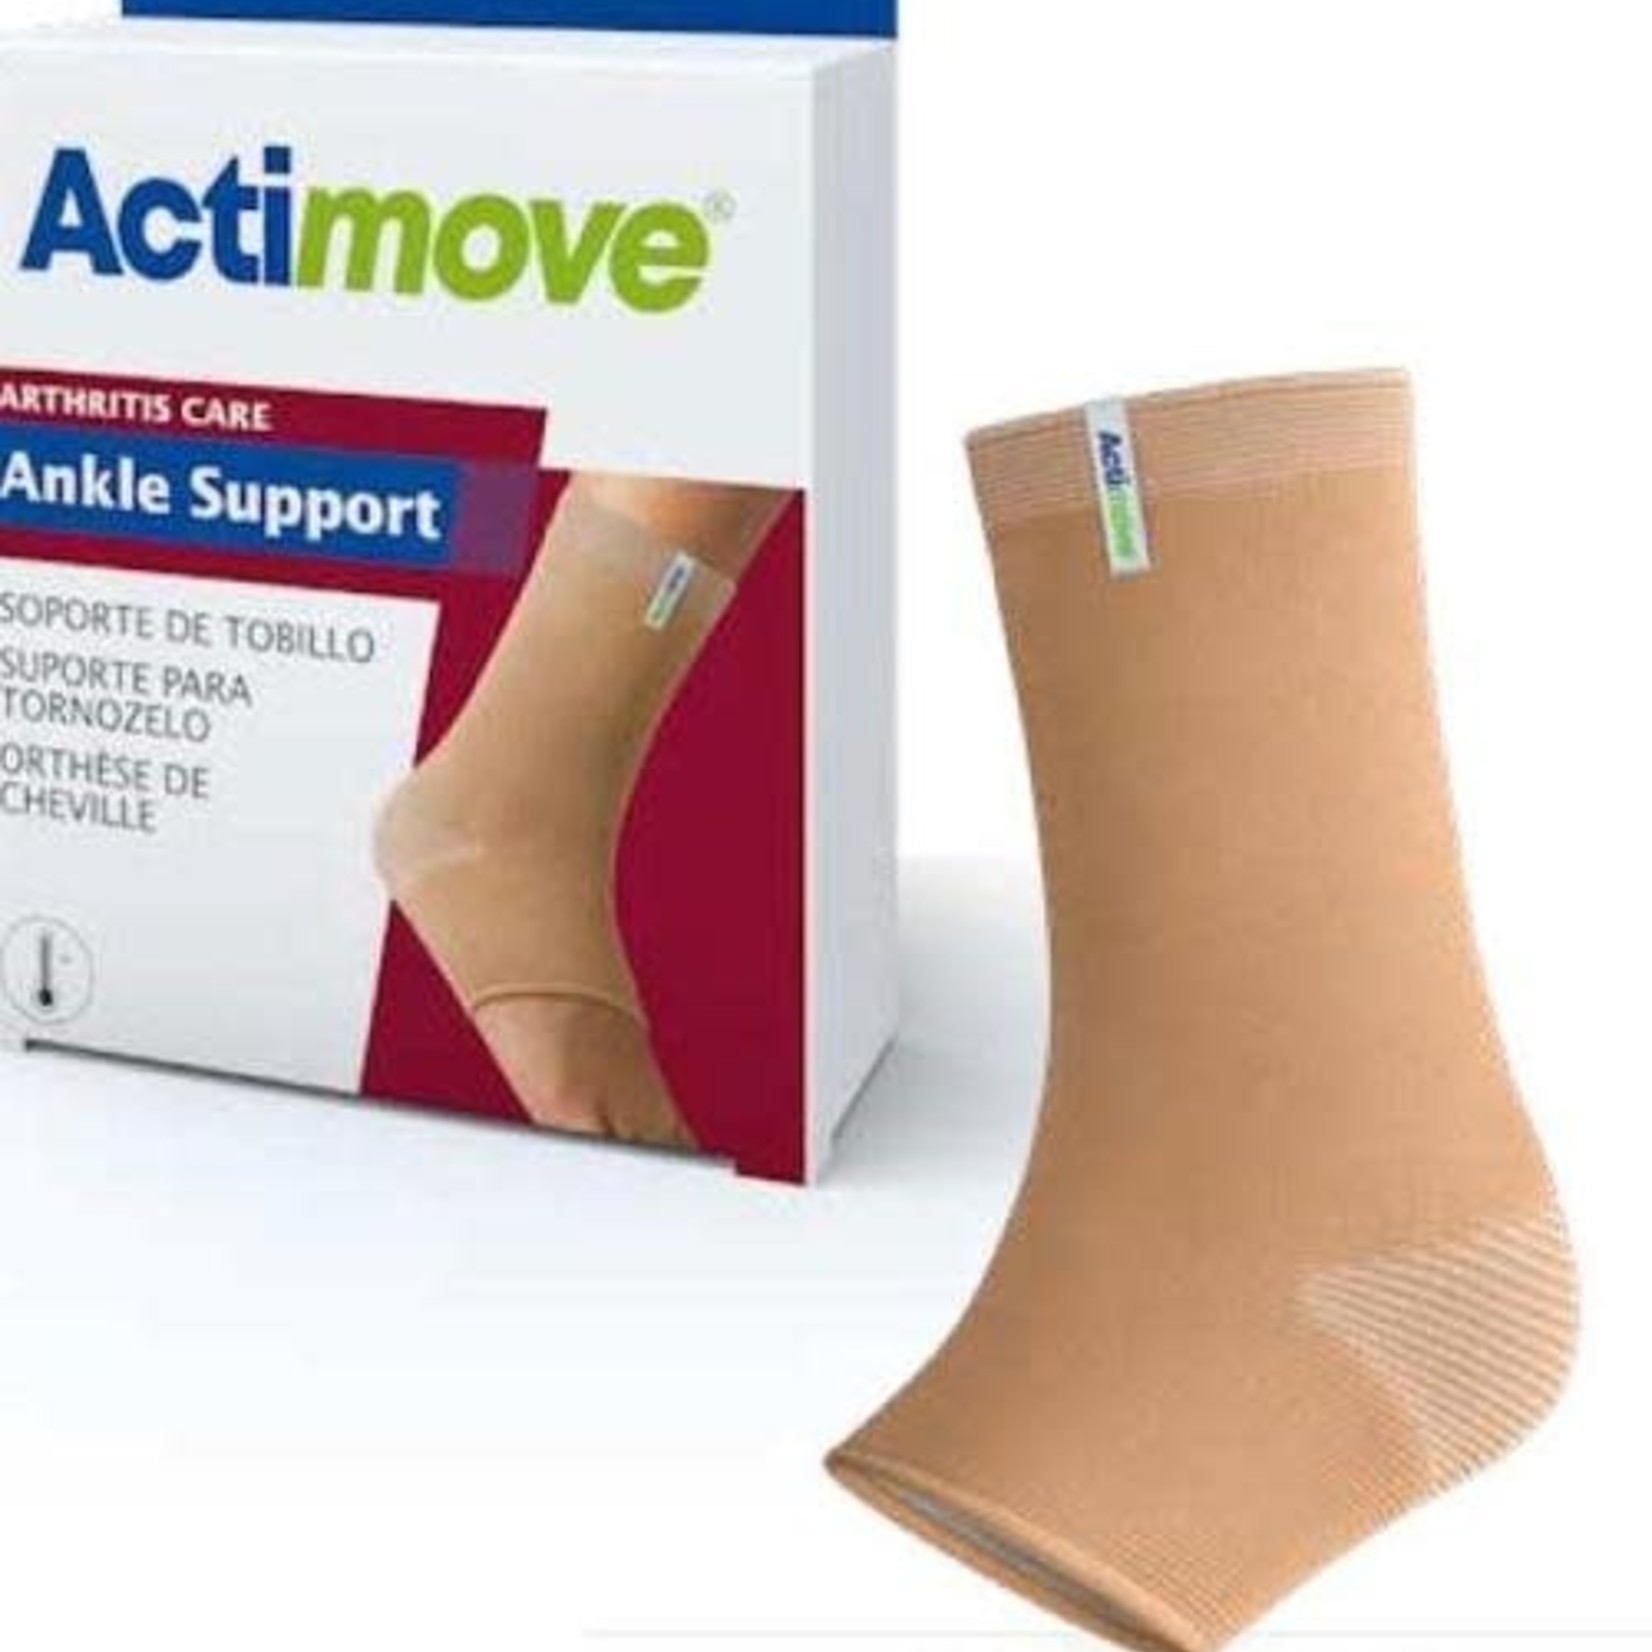 ActiMove Ankle Support - Arthritis Care